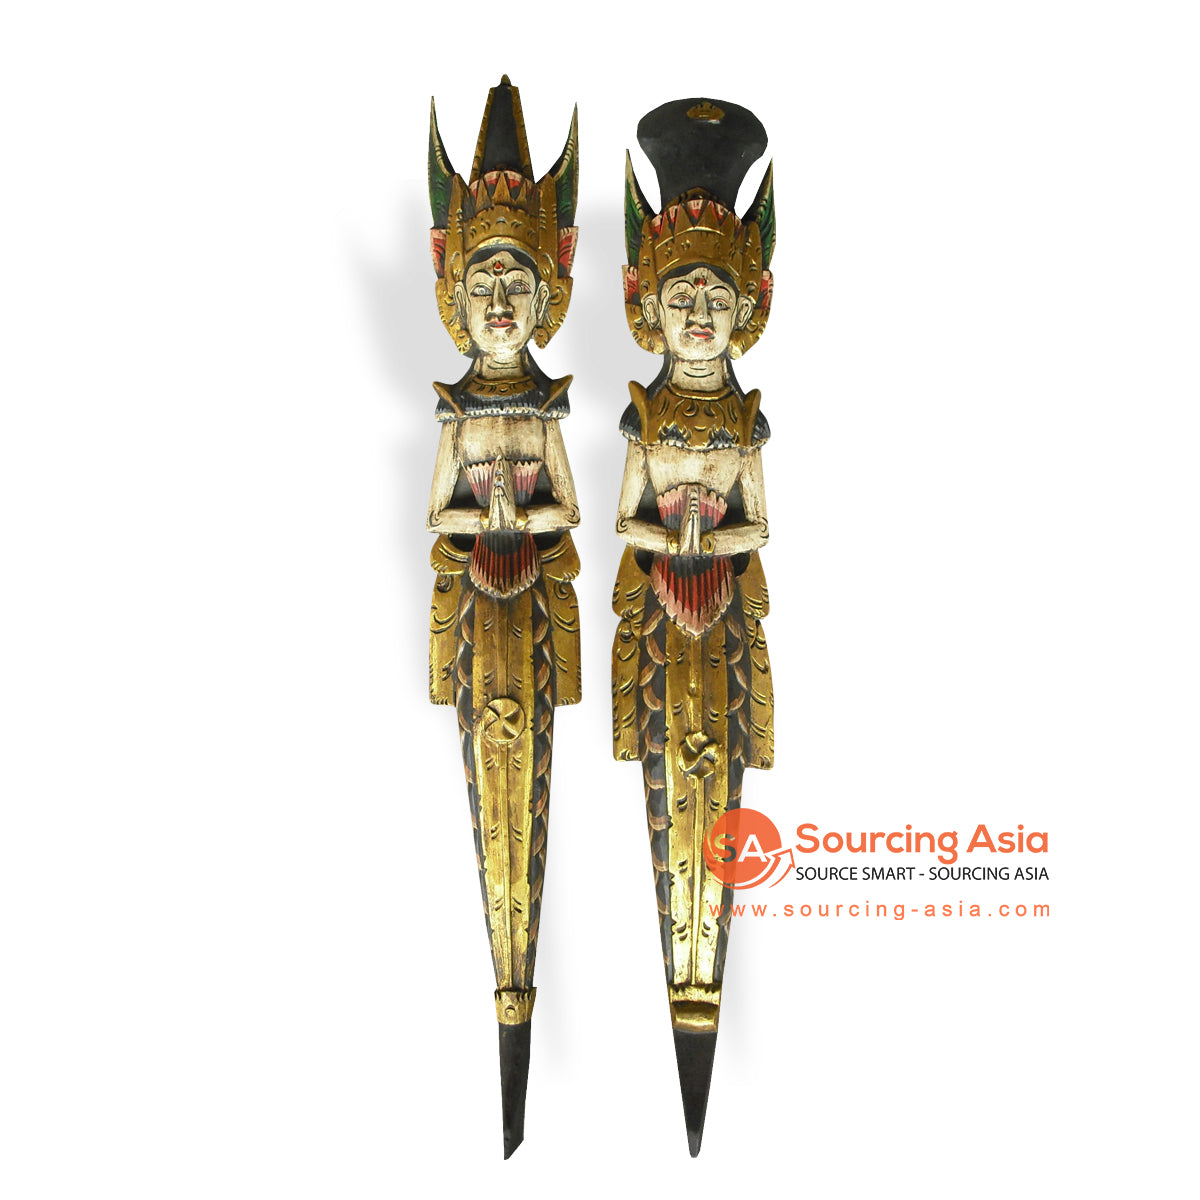 DEW018-1 WOODEN BALINESE COUPLE WALL DECORATION